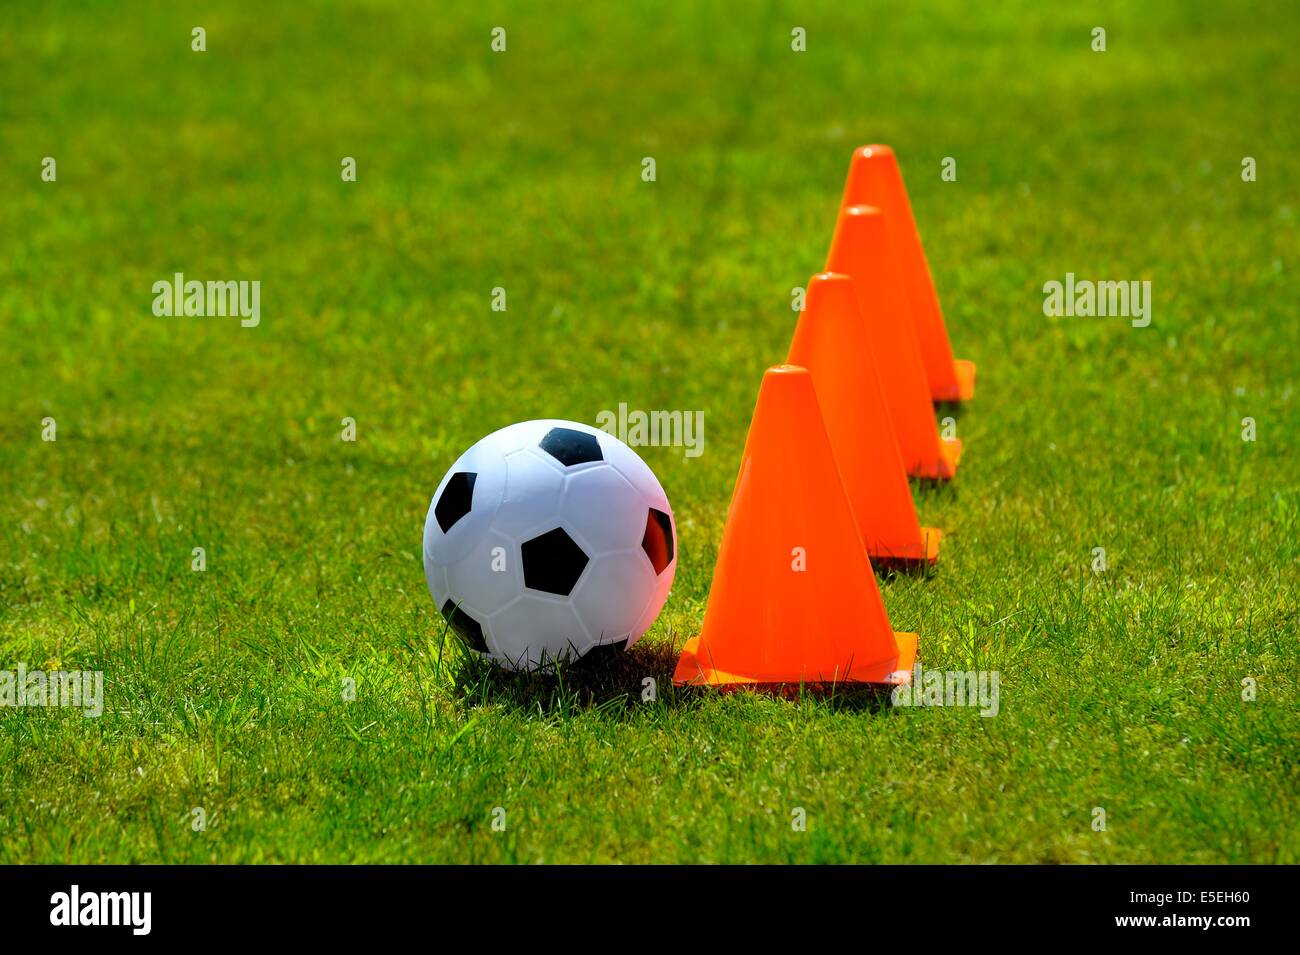 Orange cones and a football in a garden on a sunny day uk Stock Photo